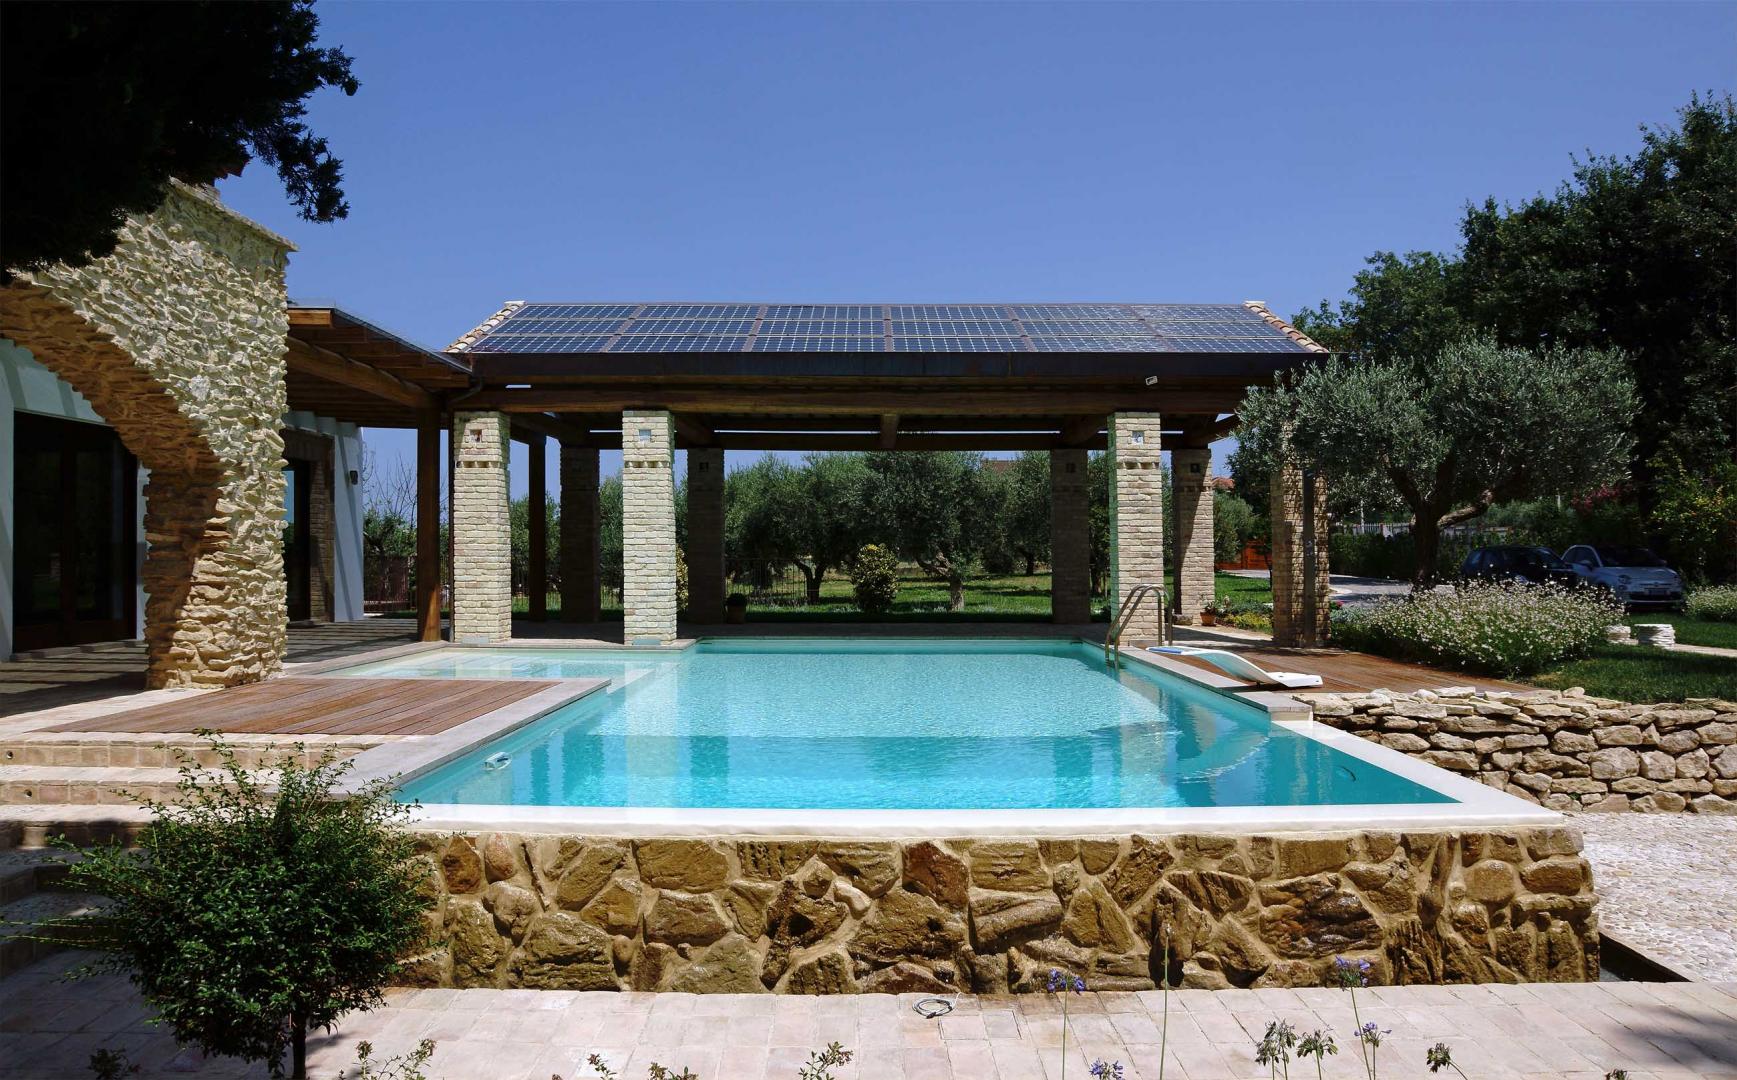 terrace villa in stone and wood